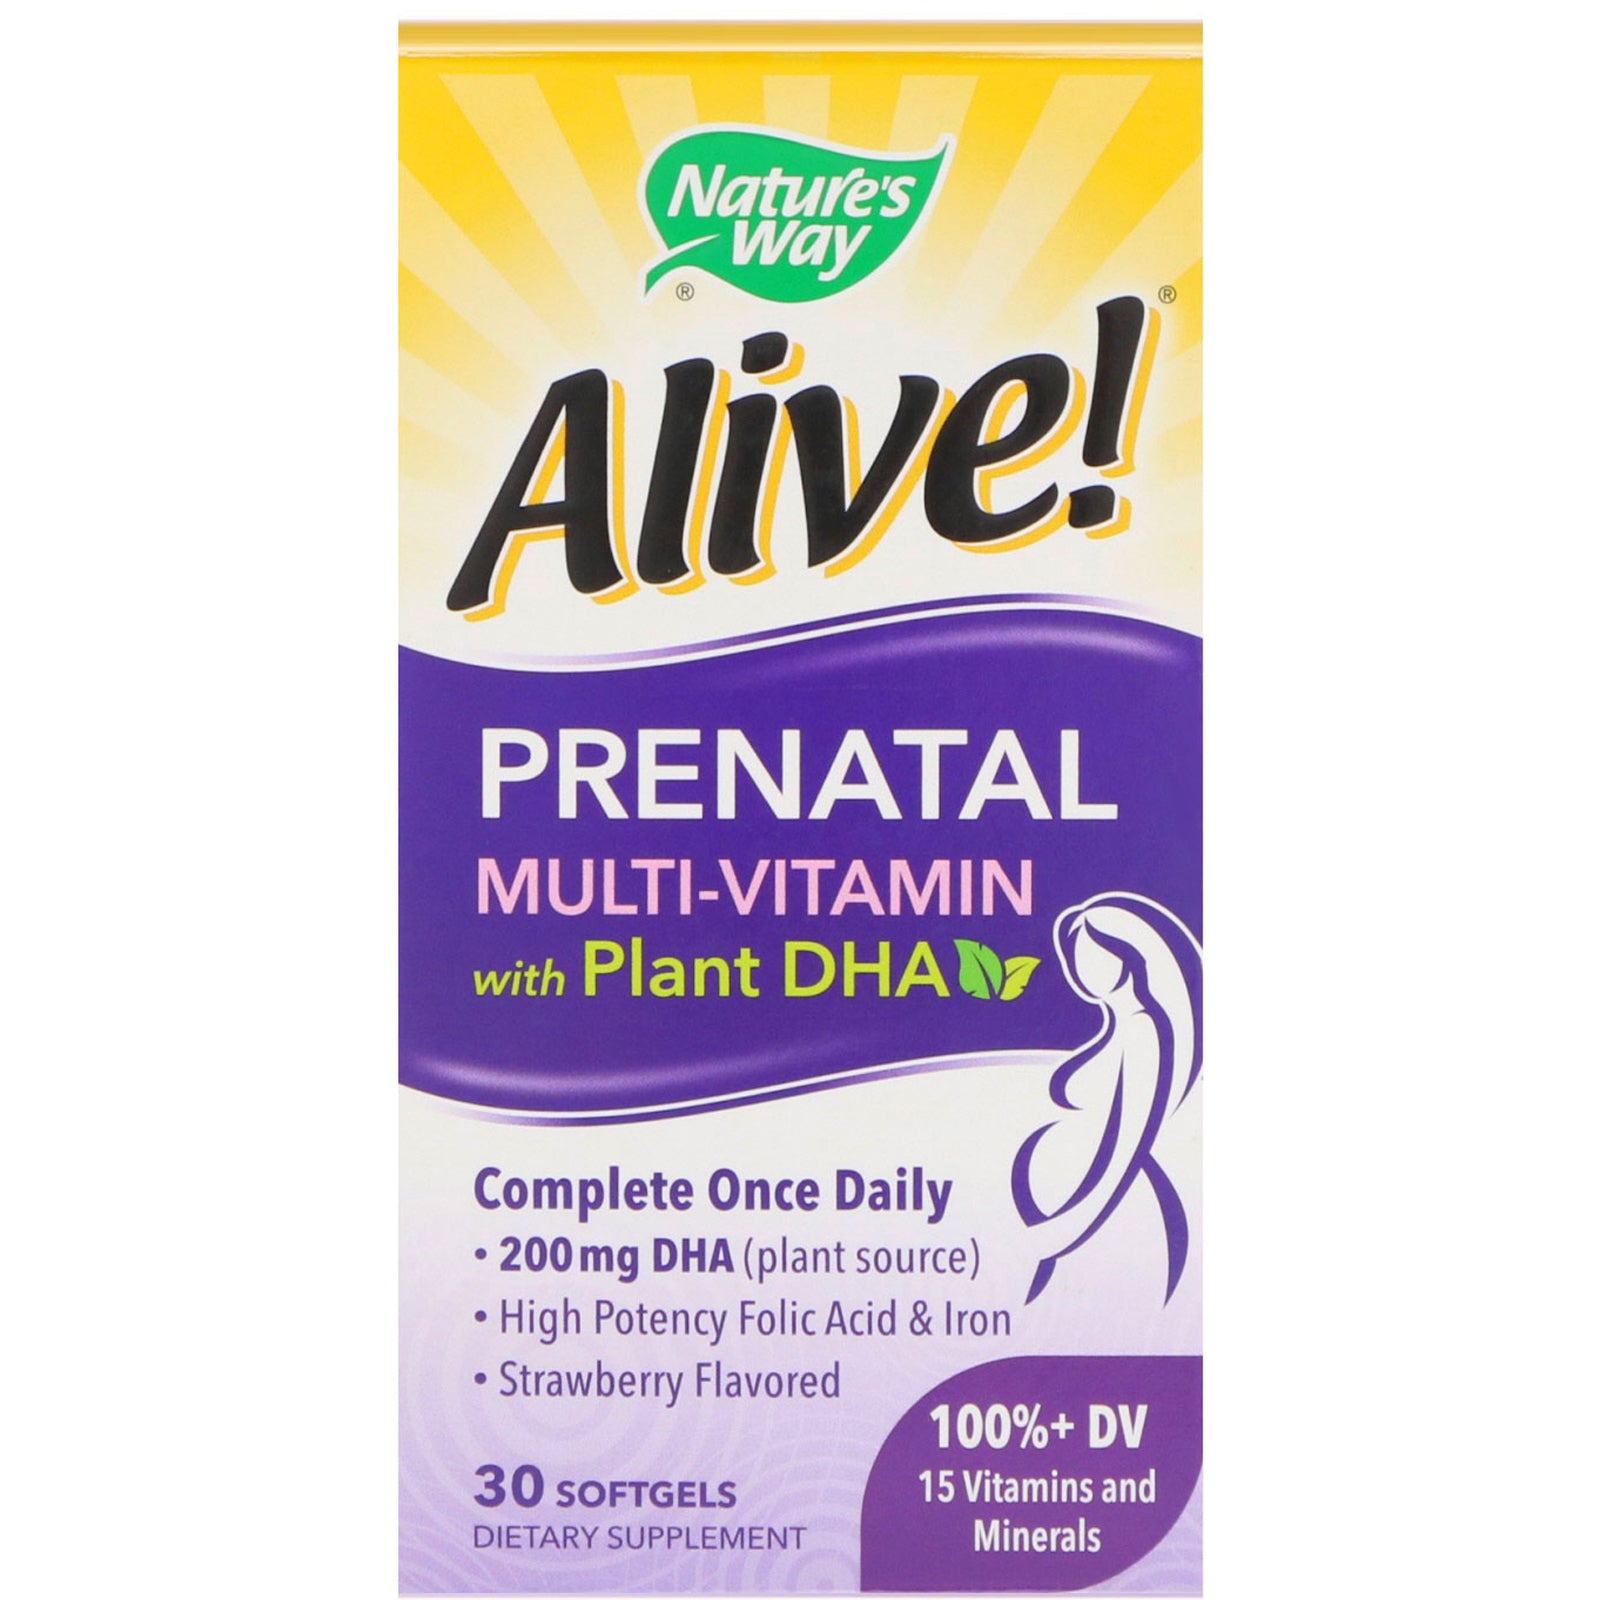 Nature's Way, Alive! Prenatal Multi-Vitamin with Plant DHA, Strawberry Flavored, 30 Softgels